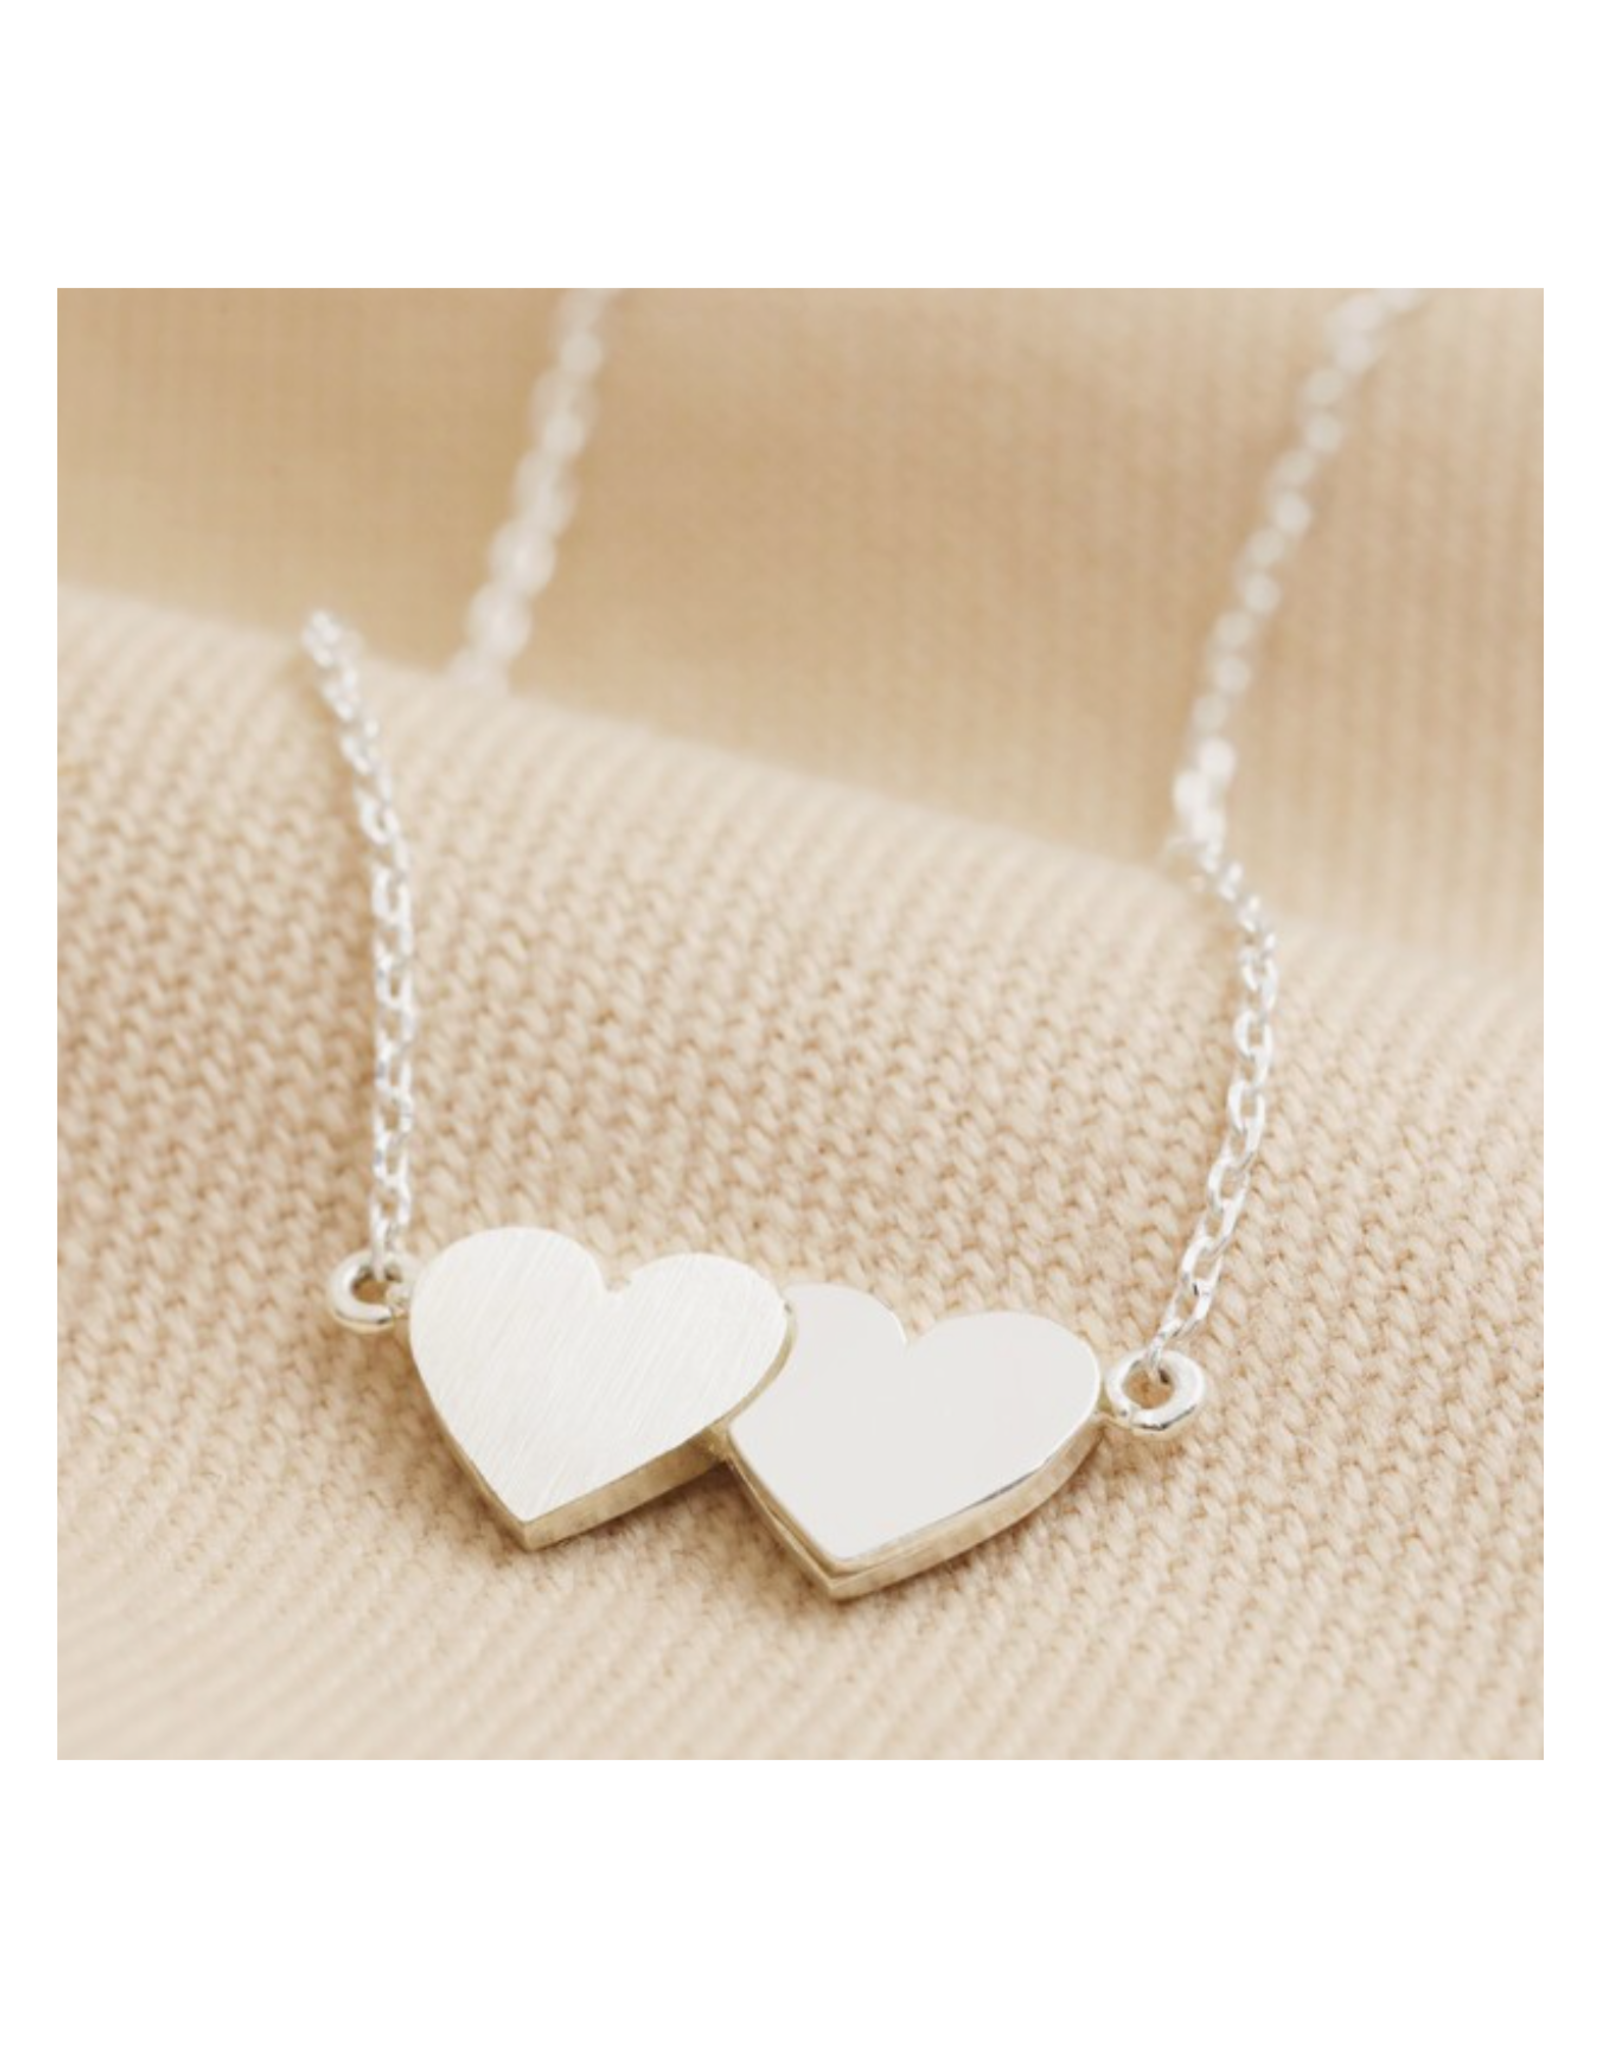 new linked hearts jewellery collection - Fiore Jewellery